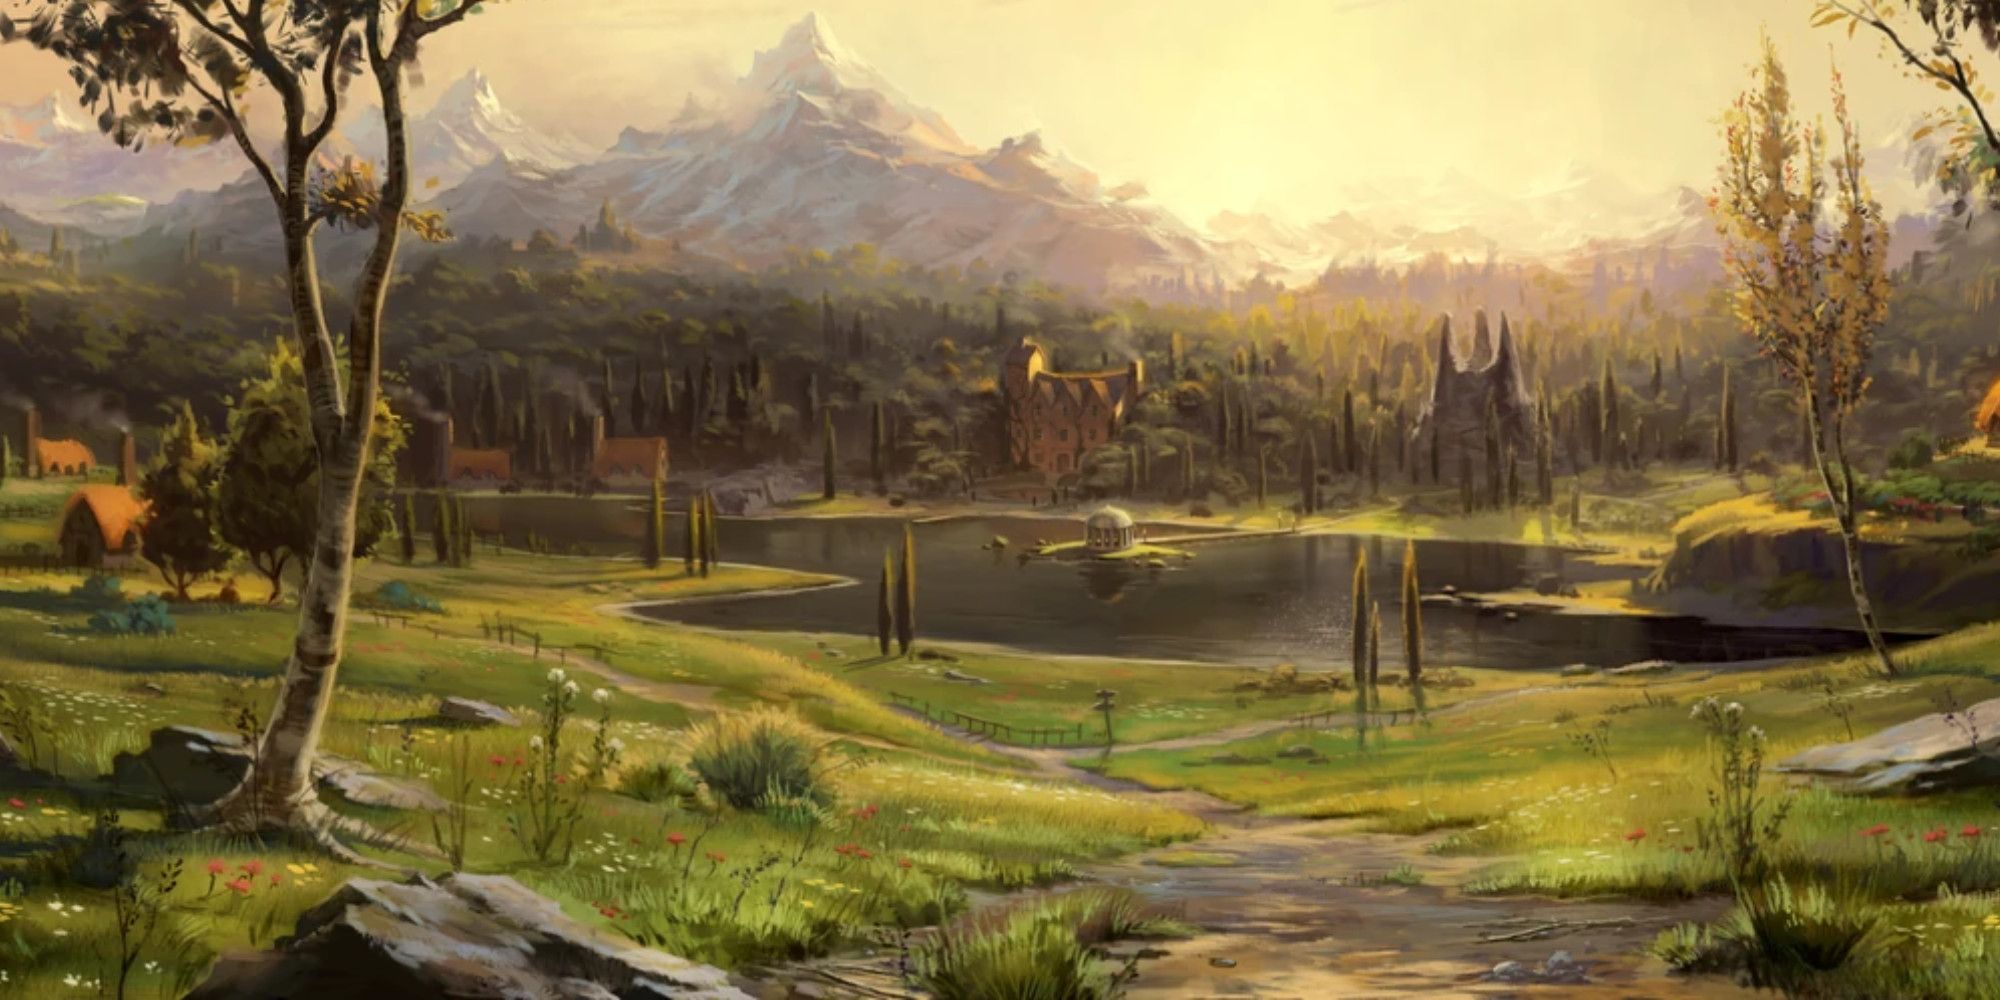 A piece of concept art of a location in Albion, showing a lush green countryside with a lake and mountains in the background. 